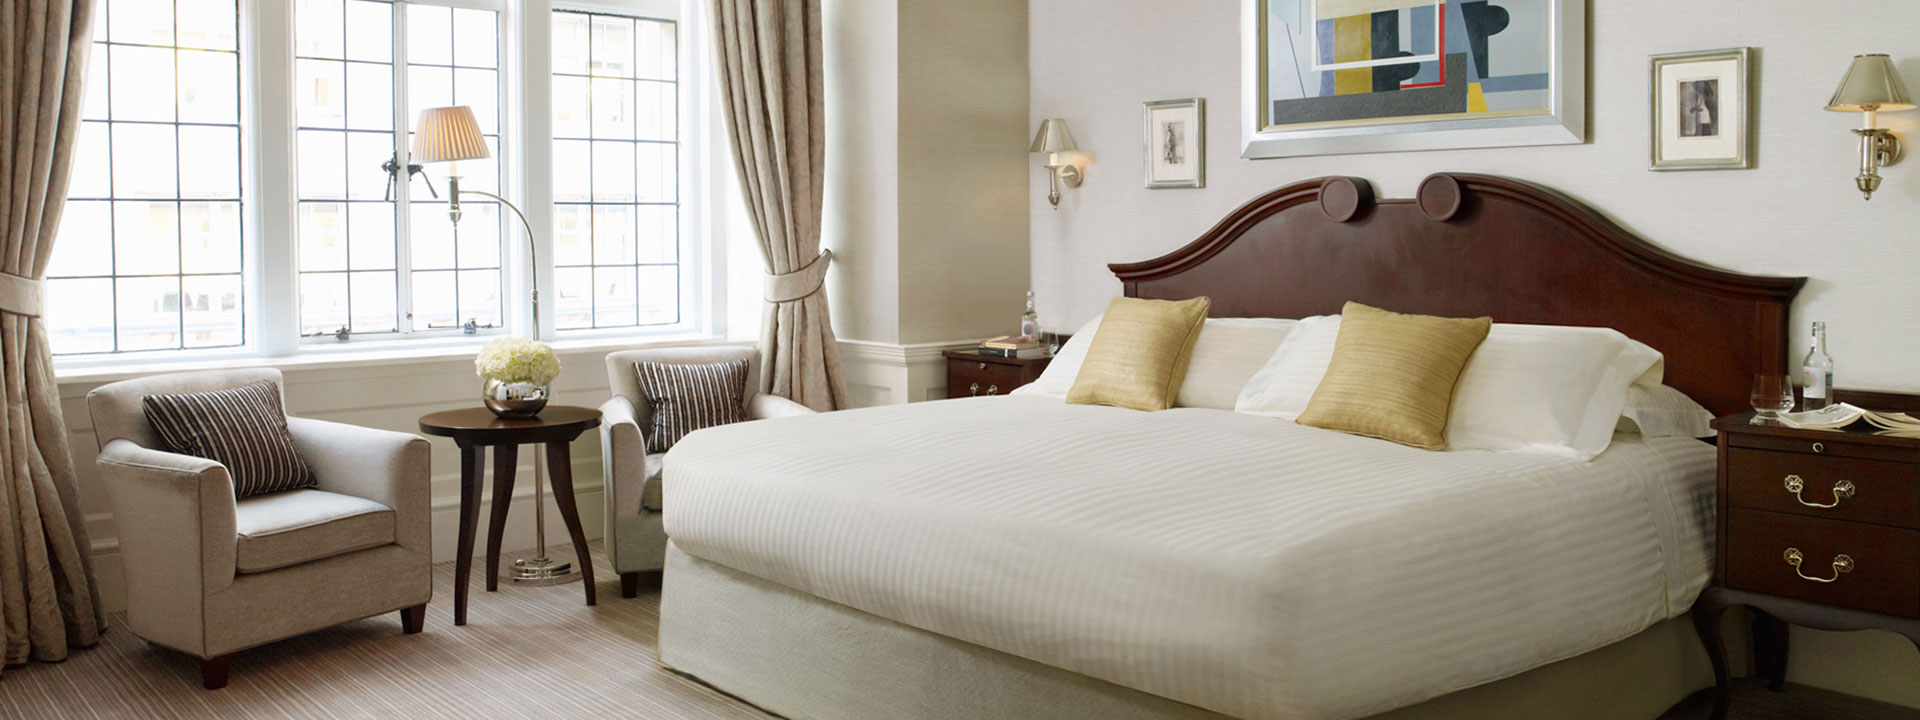 Comfortable and spacious bed at the Grosvenor Suite.